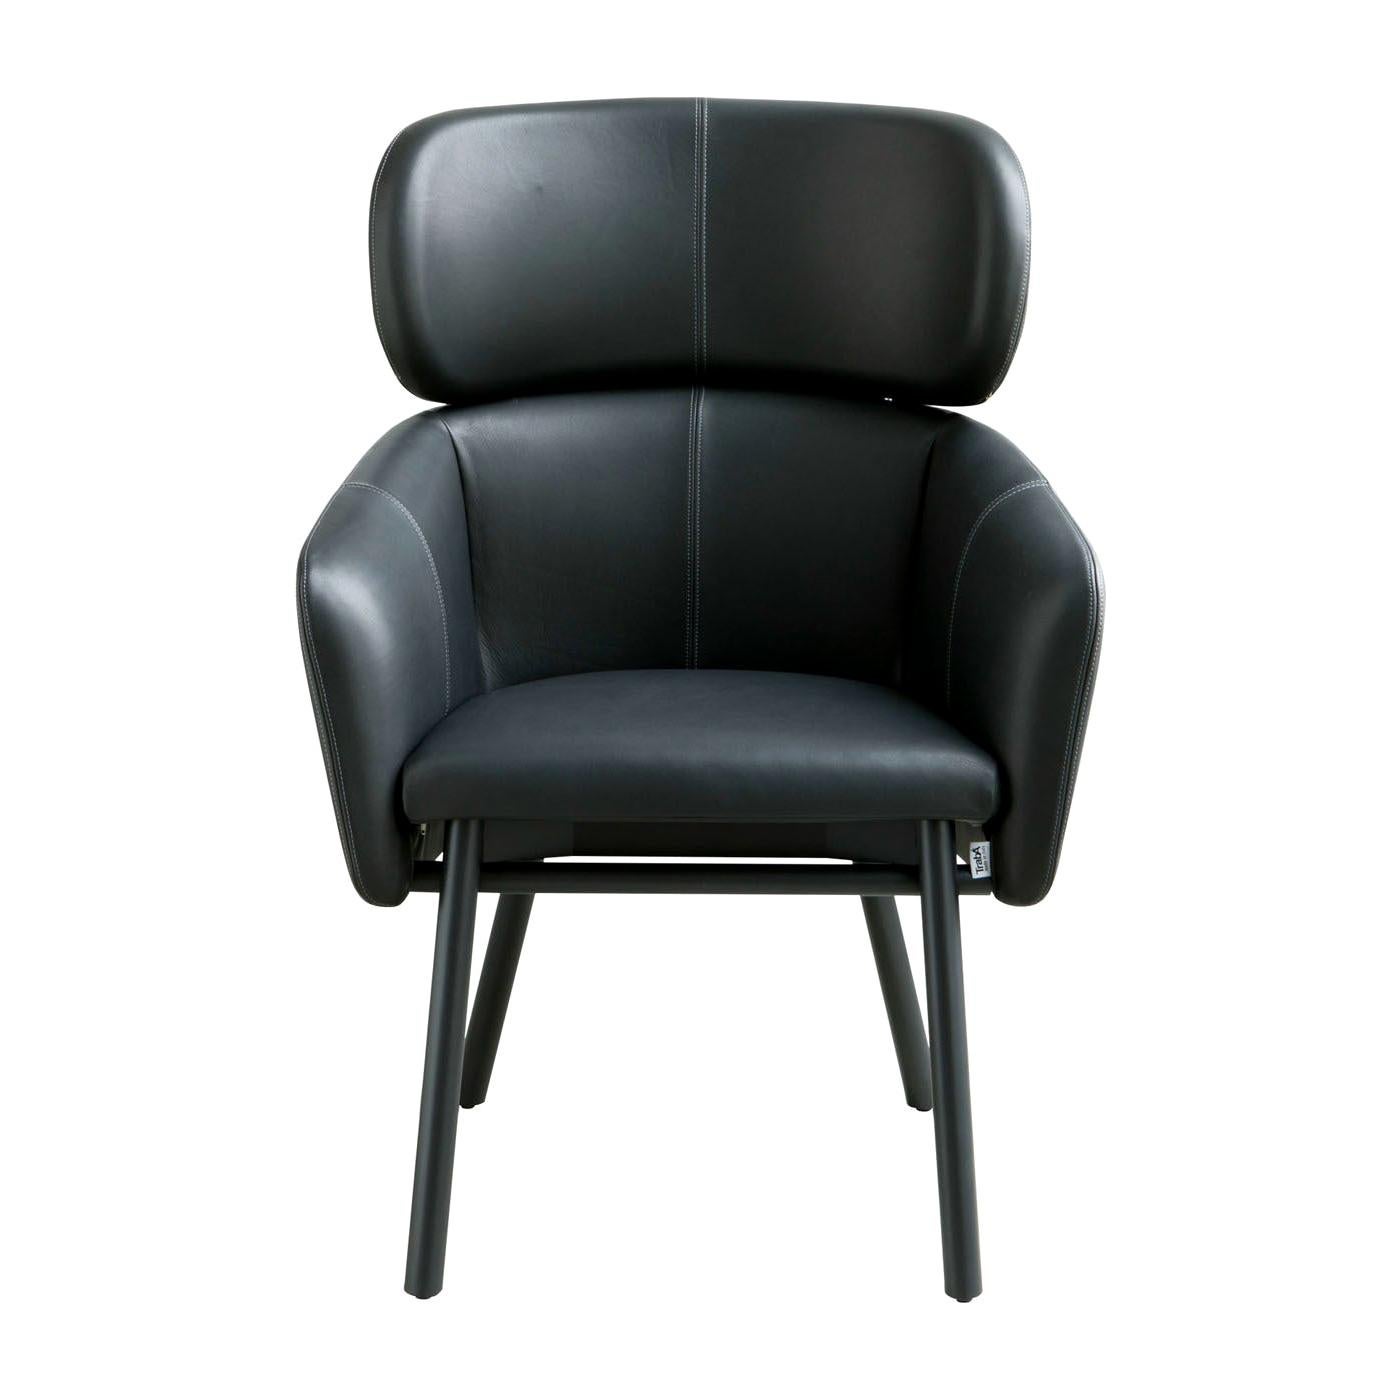 Balù Extra Large Black Chair by Emilio Nanni For Sale